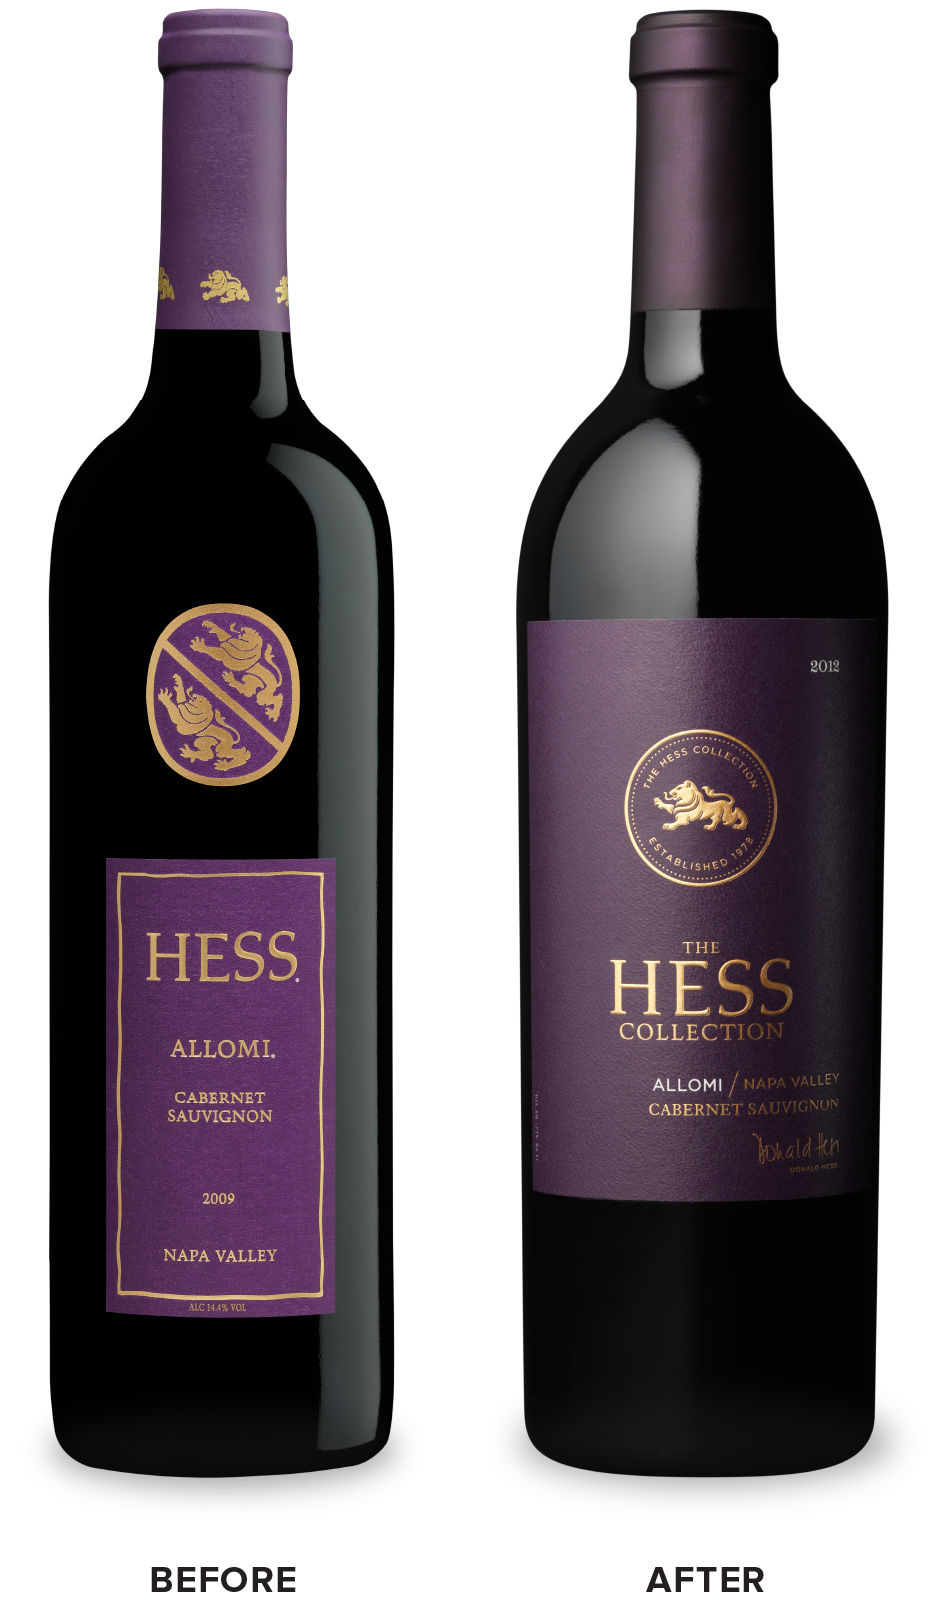 The Hess Collection Allomi Cabernet Sauvignon Wine Packaging Before Redesign on Left & After on Right